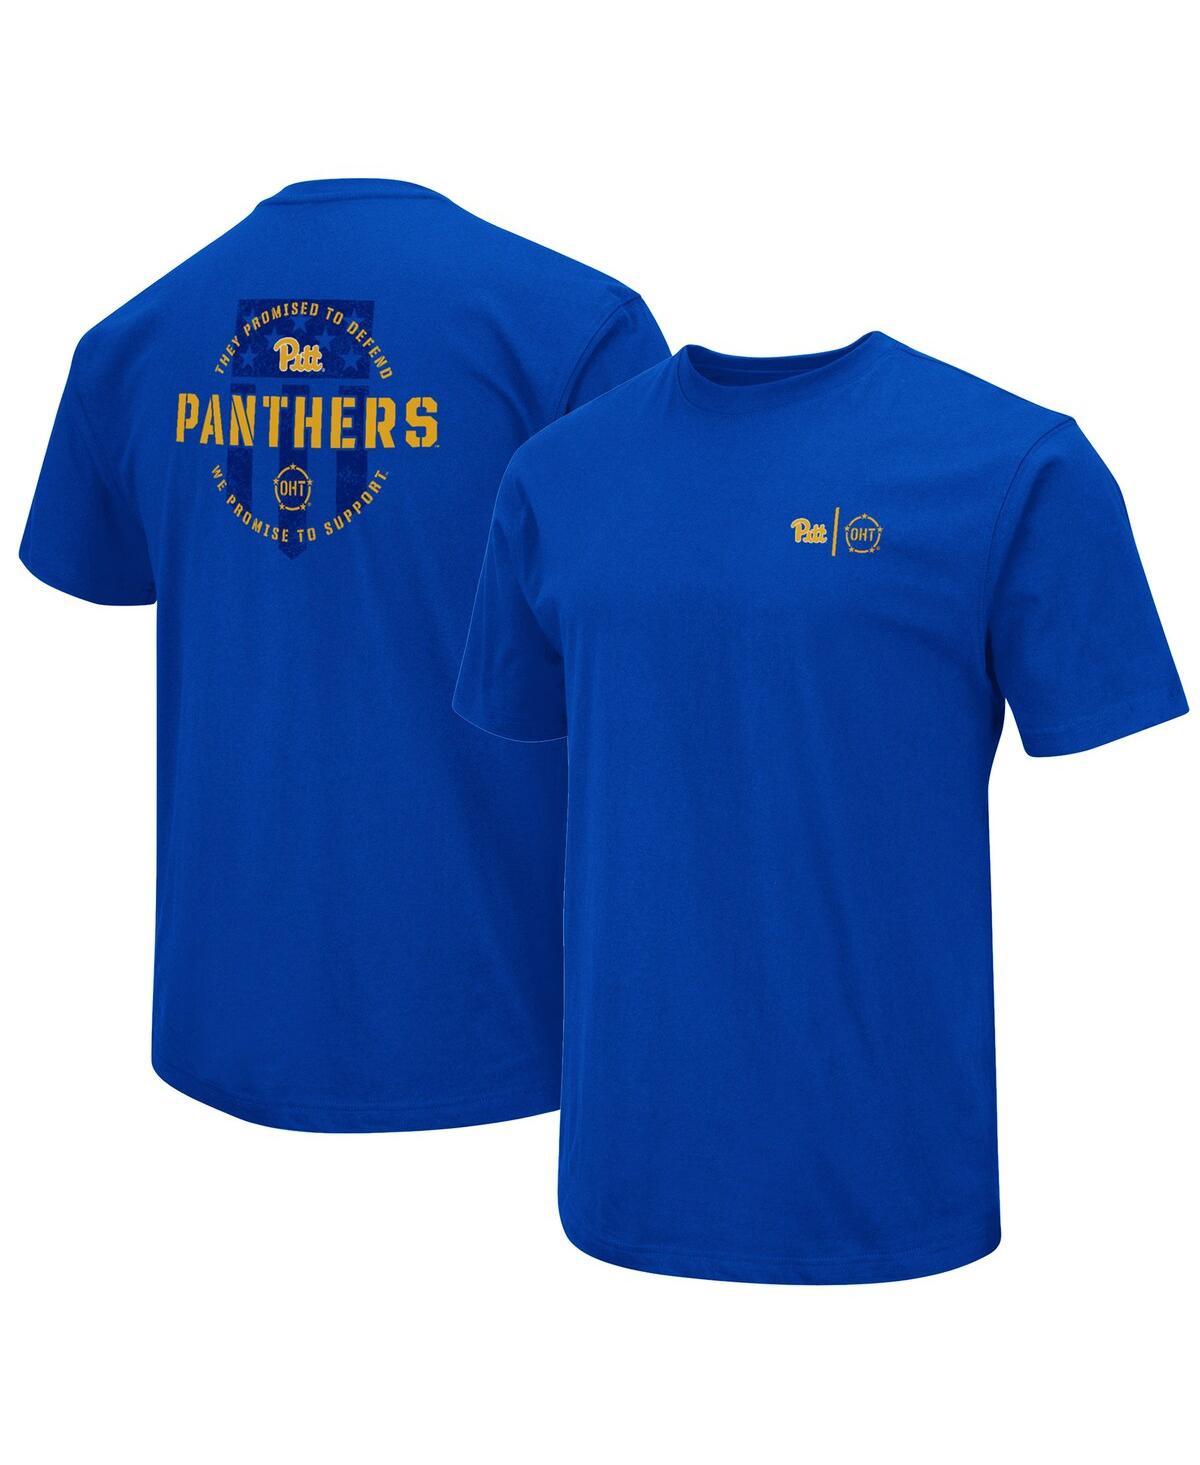 Shop Colosseum Men's  Royal Pitt Panthers Oht Military-inspired Appreciation T-shirt